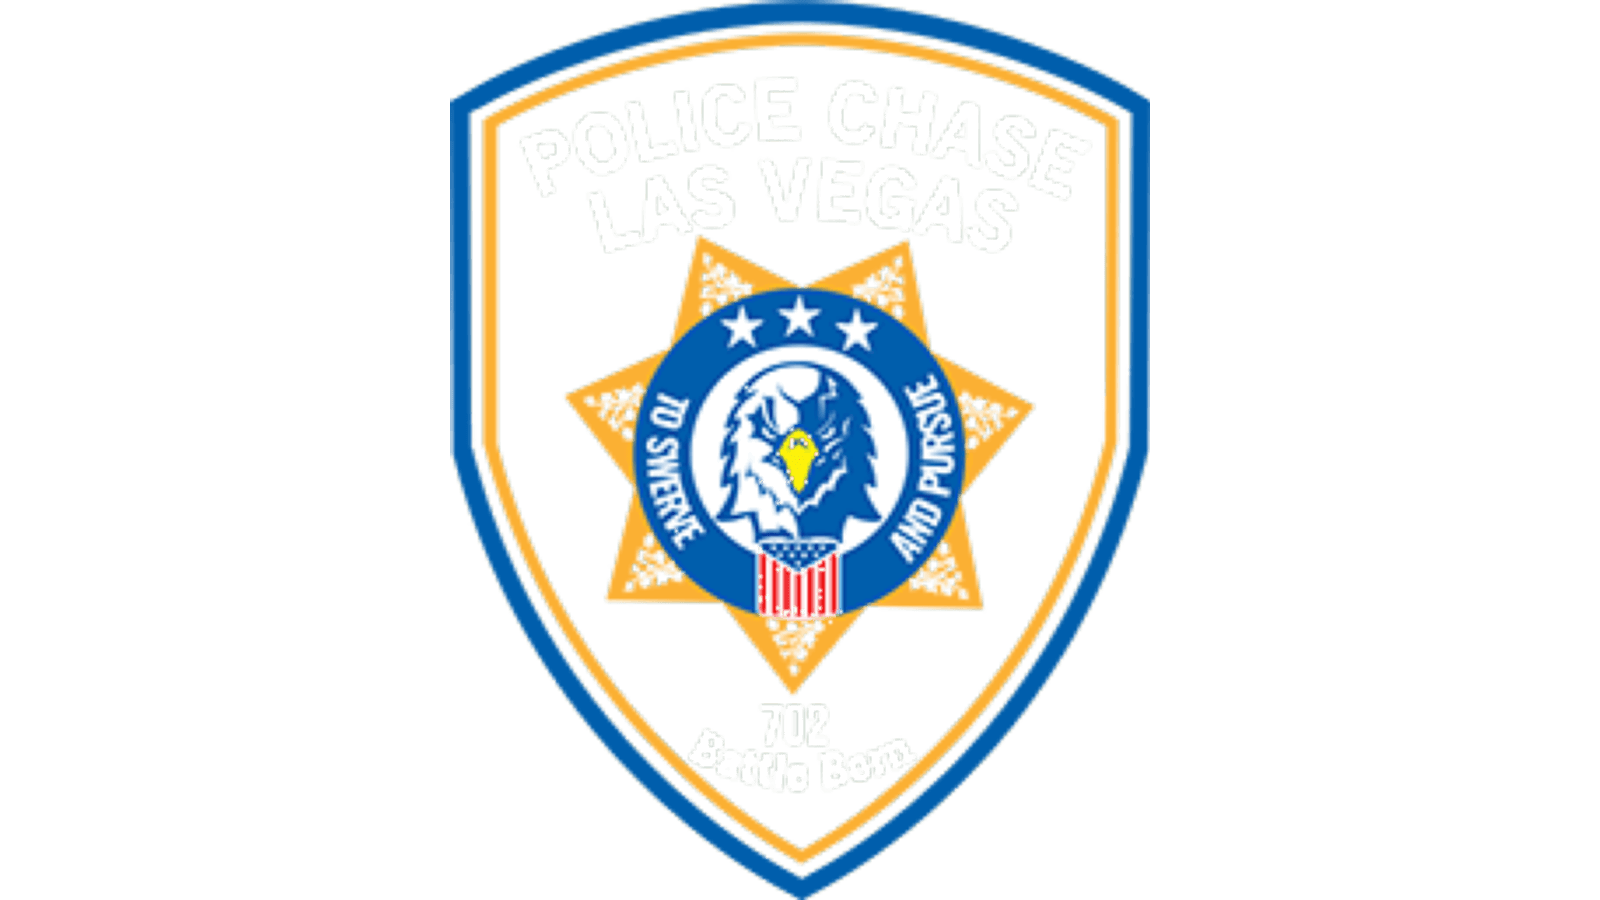 LVMPD Logo - Police Chase Las Vegas coming to LVMS in January | News | Media ...